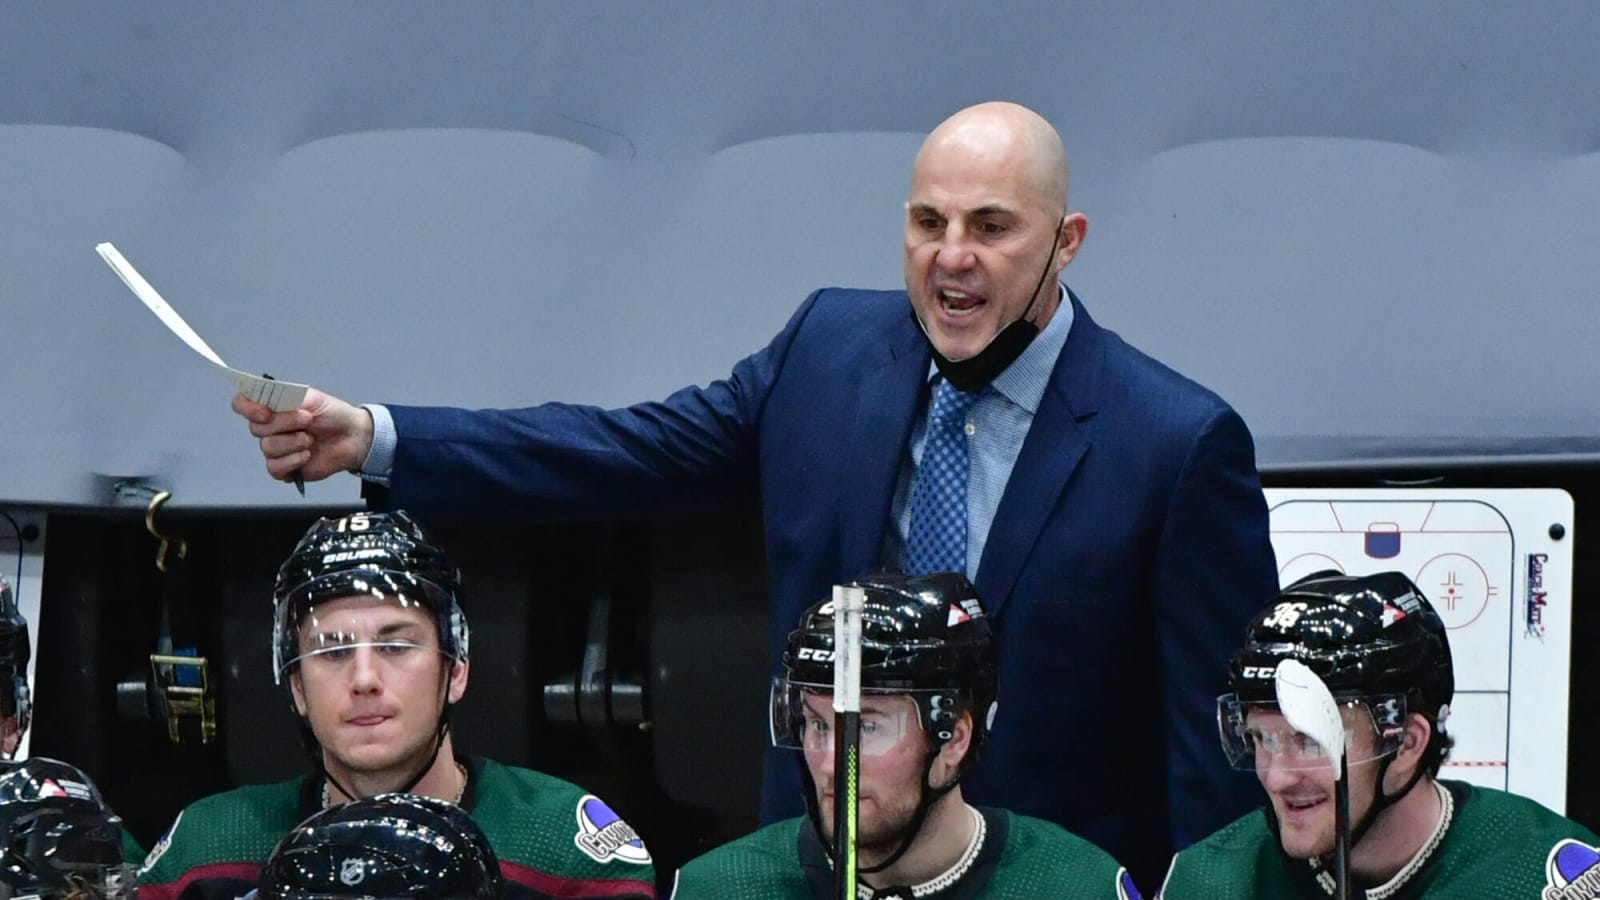 Rumours that Rick Tocchet will be the next head coach of the Vancouver Canucks heating up